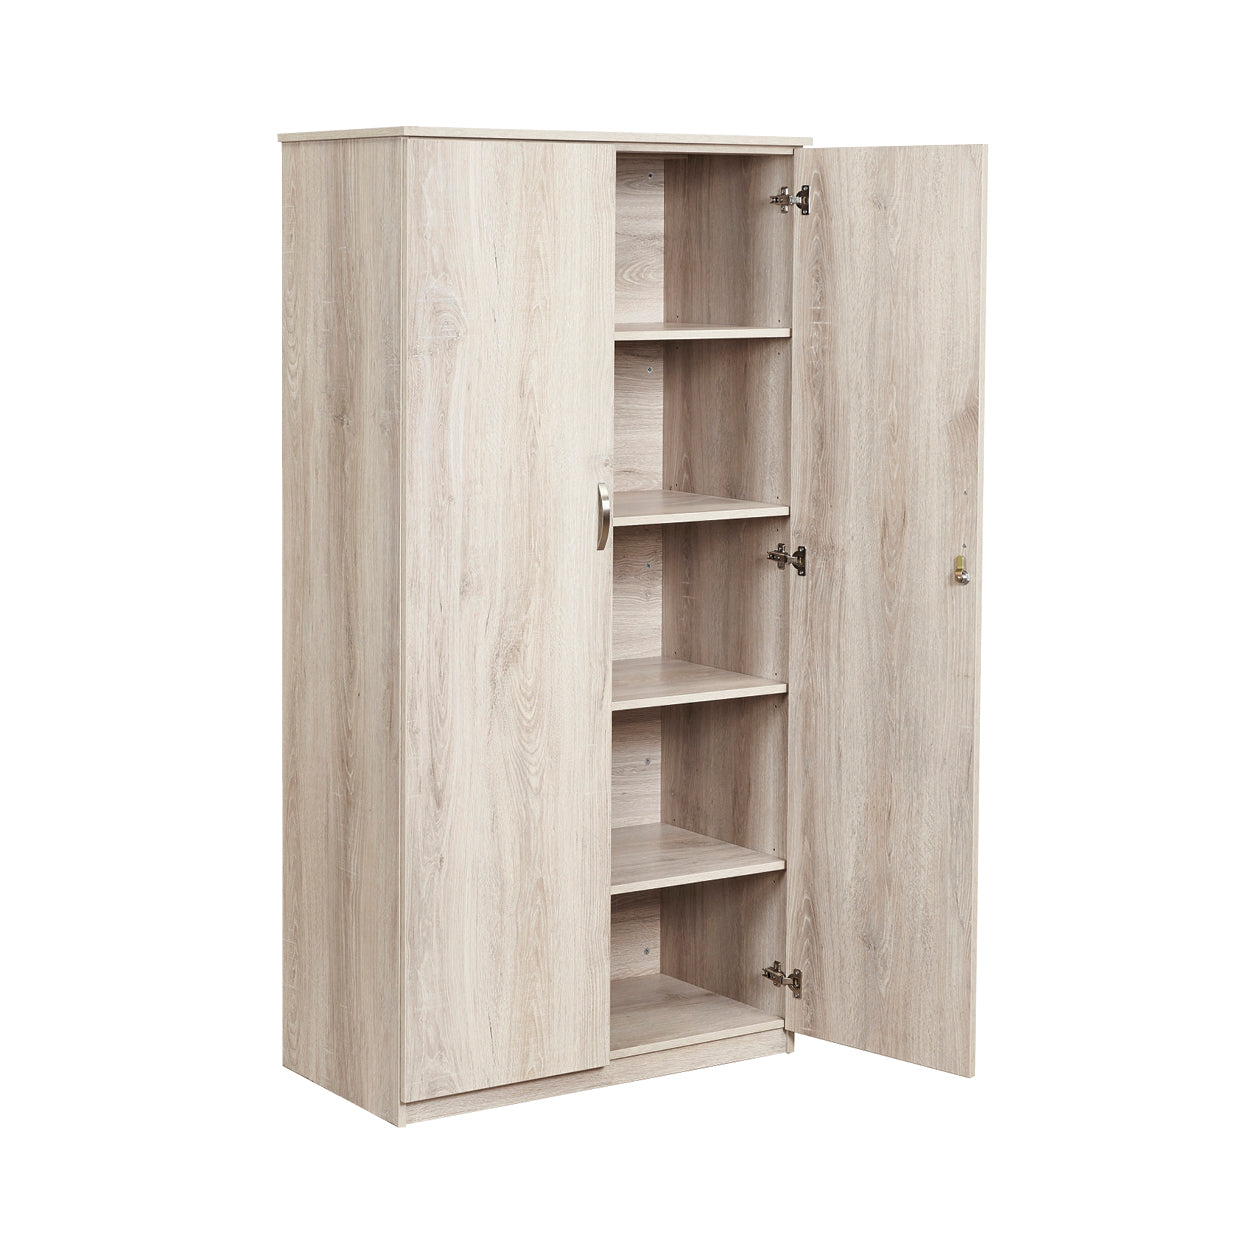 Hedcor bookcase